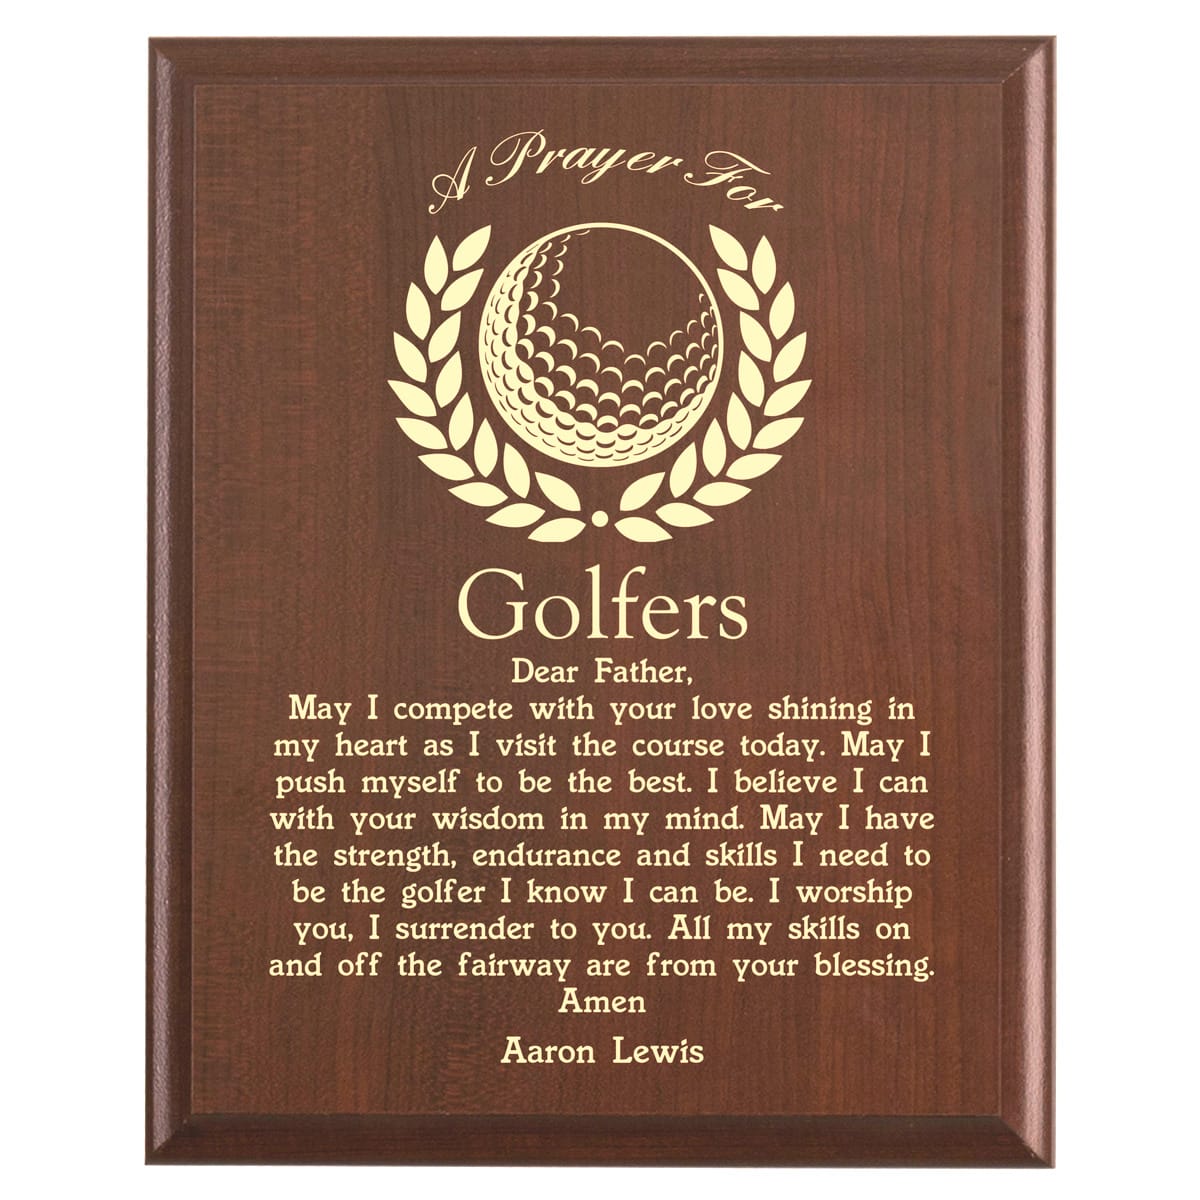 Plaque photo: Golfer Prayer Plaque design with free personalization. Wood style finish with customized text.